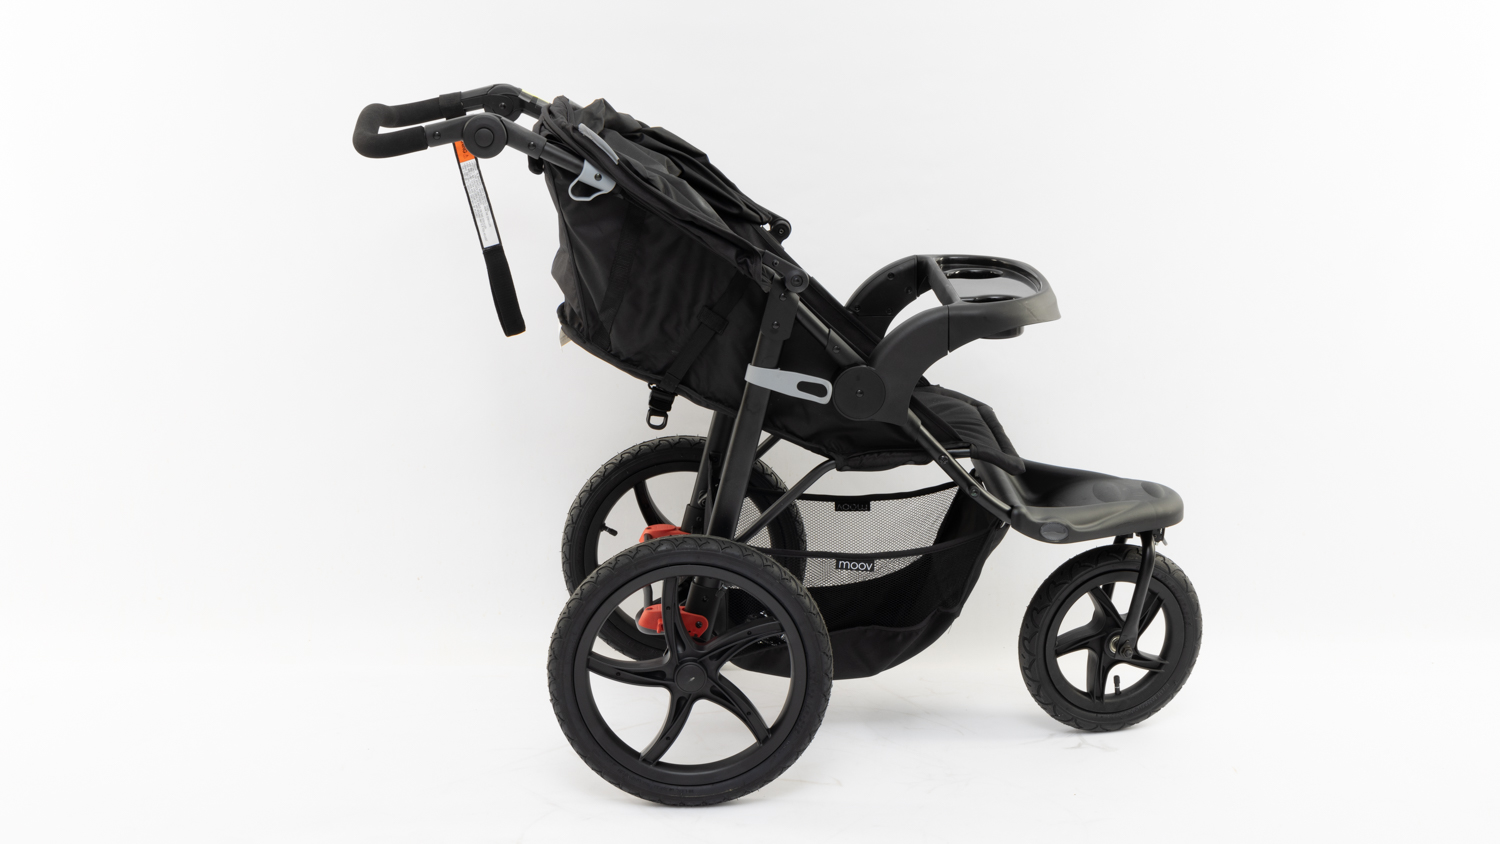 Childcare Moov Jogger Review | Pram and stroller | CHOICE